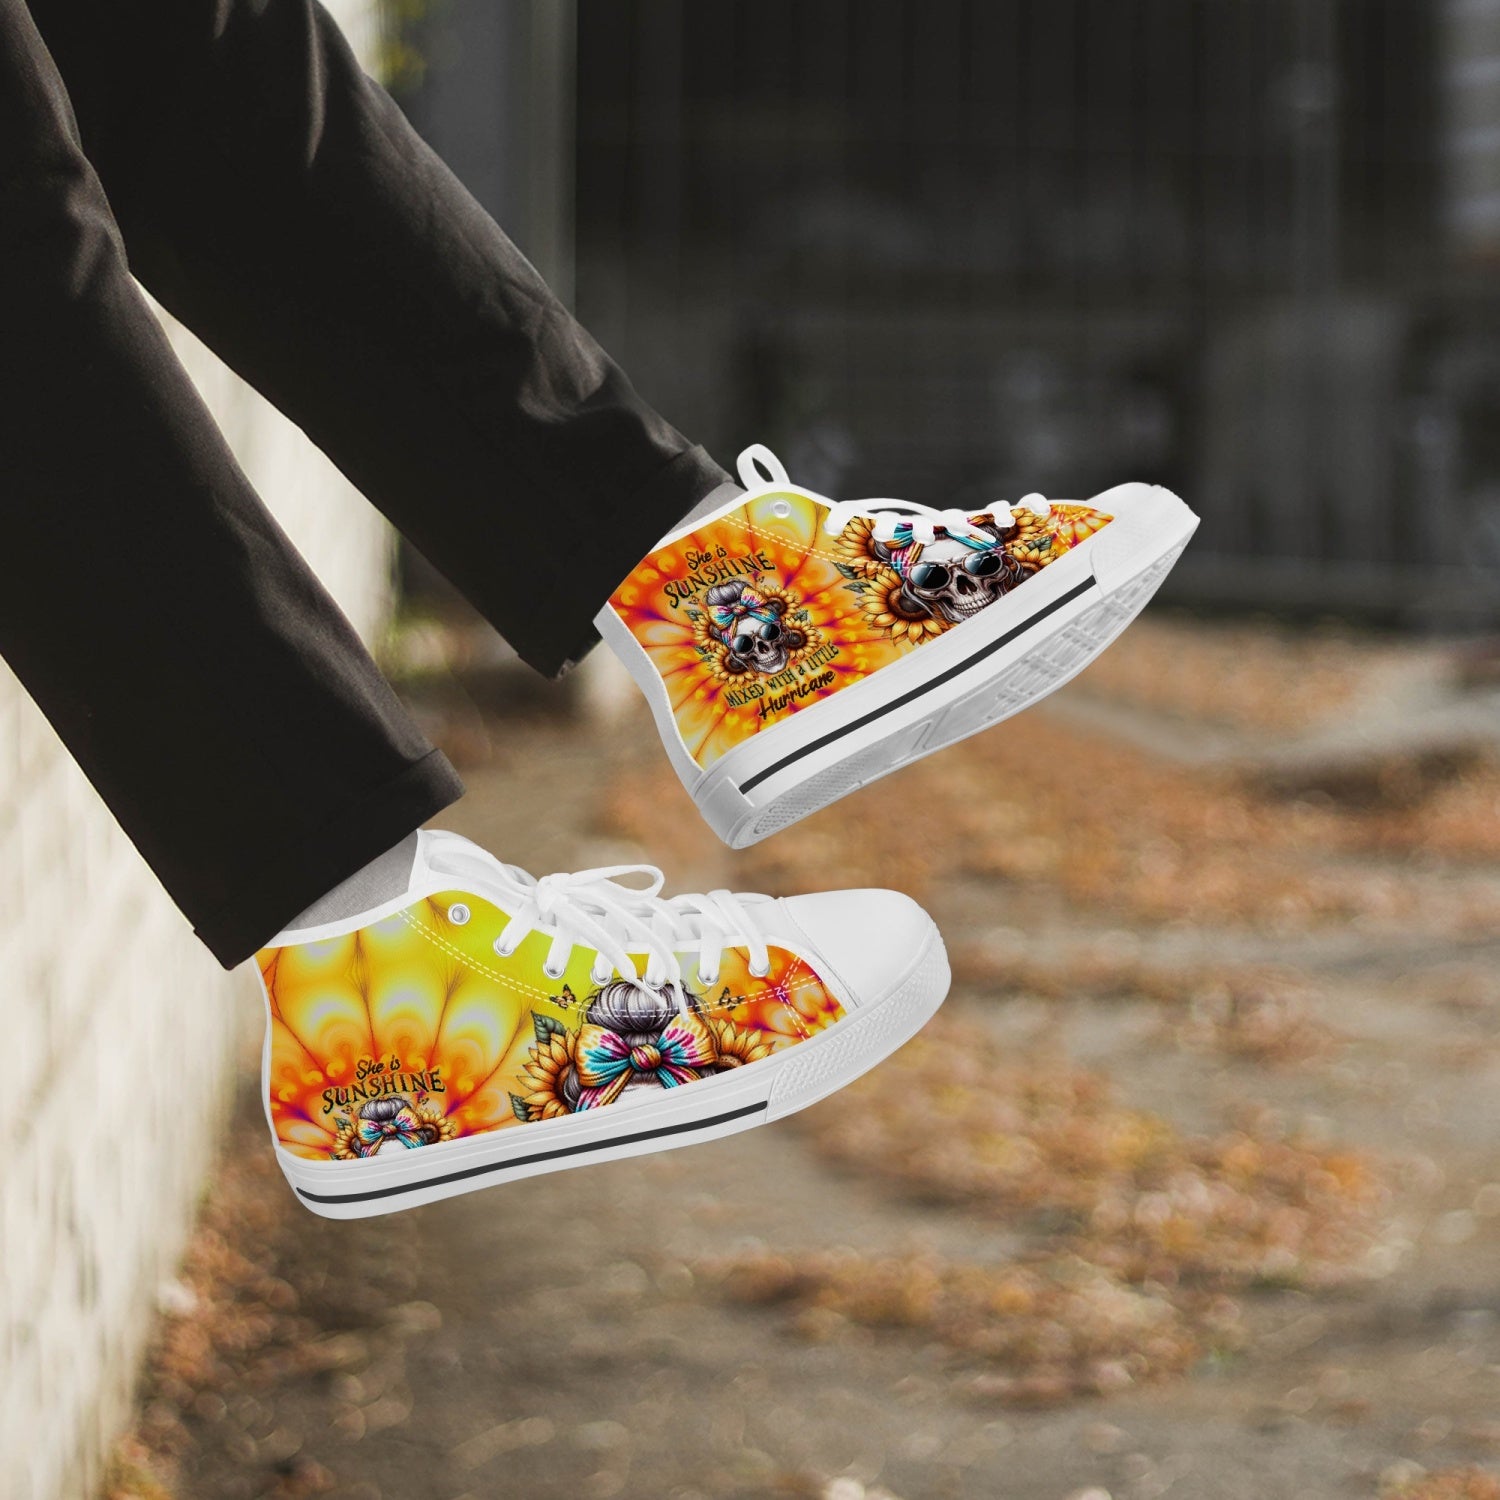 SHE IS SUNSHINE SKULL TIE DYE HIGH TOP CANVAS SHOES - TLTW0711239